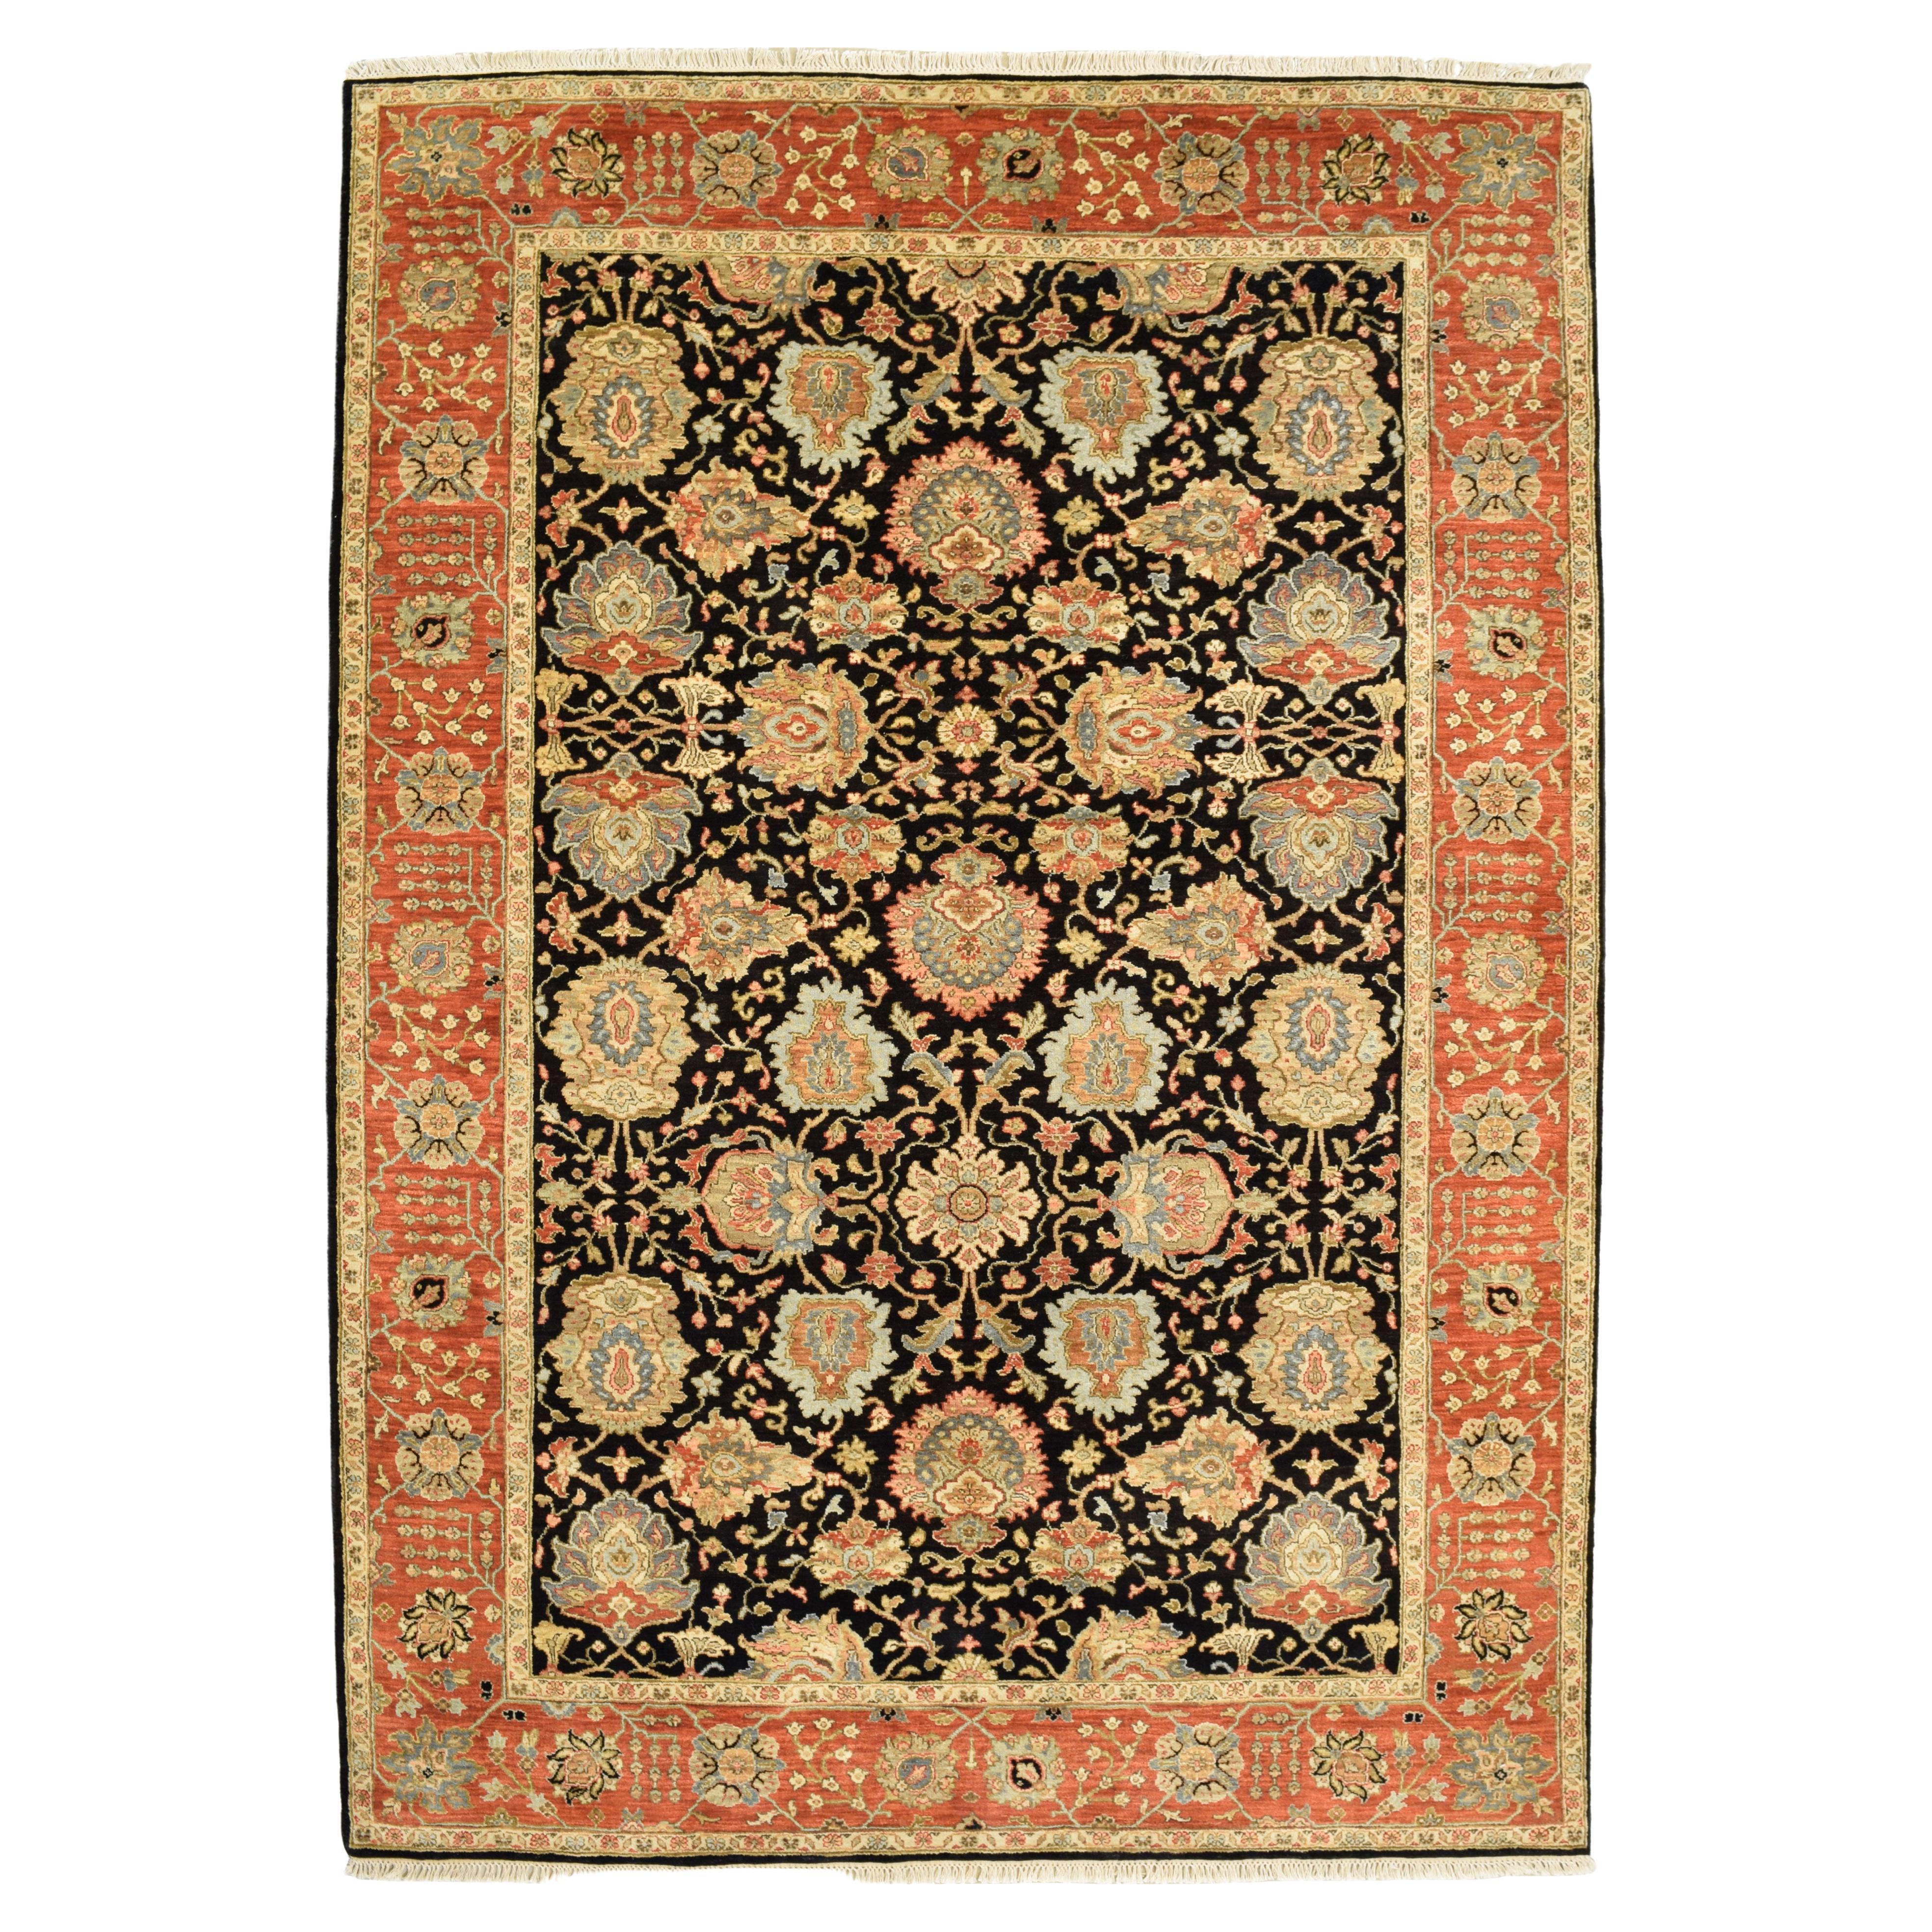 Hand-Knotted Persian Agra Carpet, Red, Orange, and Black Wool, 6' x 9' For Sale